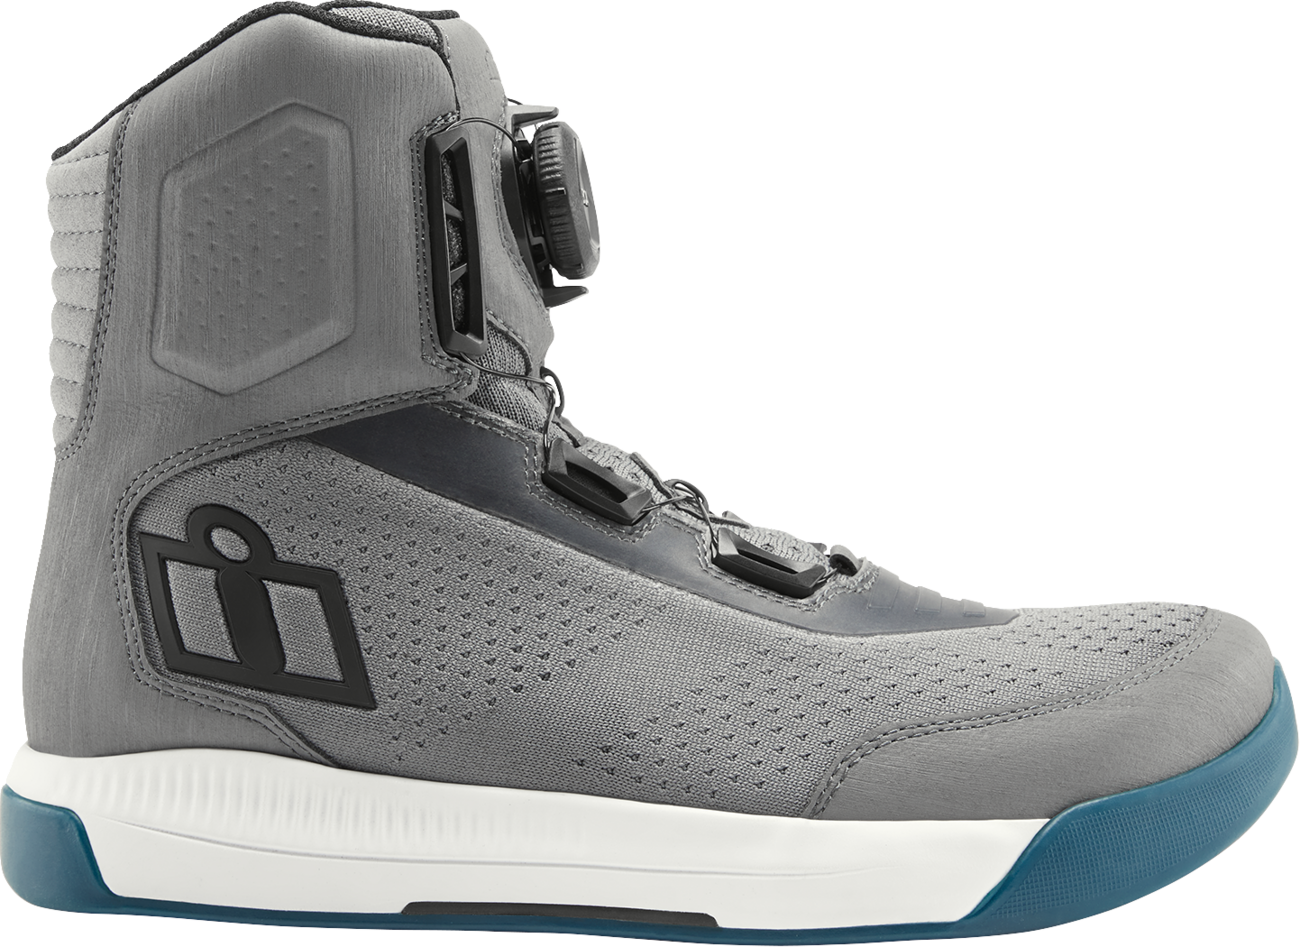 ICON Overlord™ Vented CE Boots - Gray - Size 11.5 3403-1276